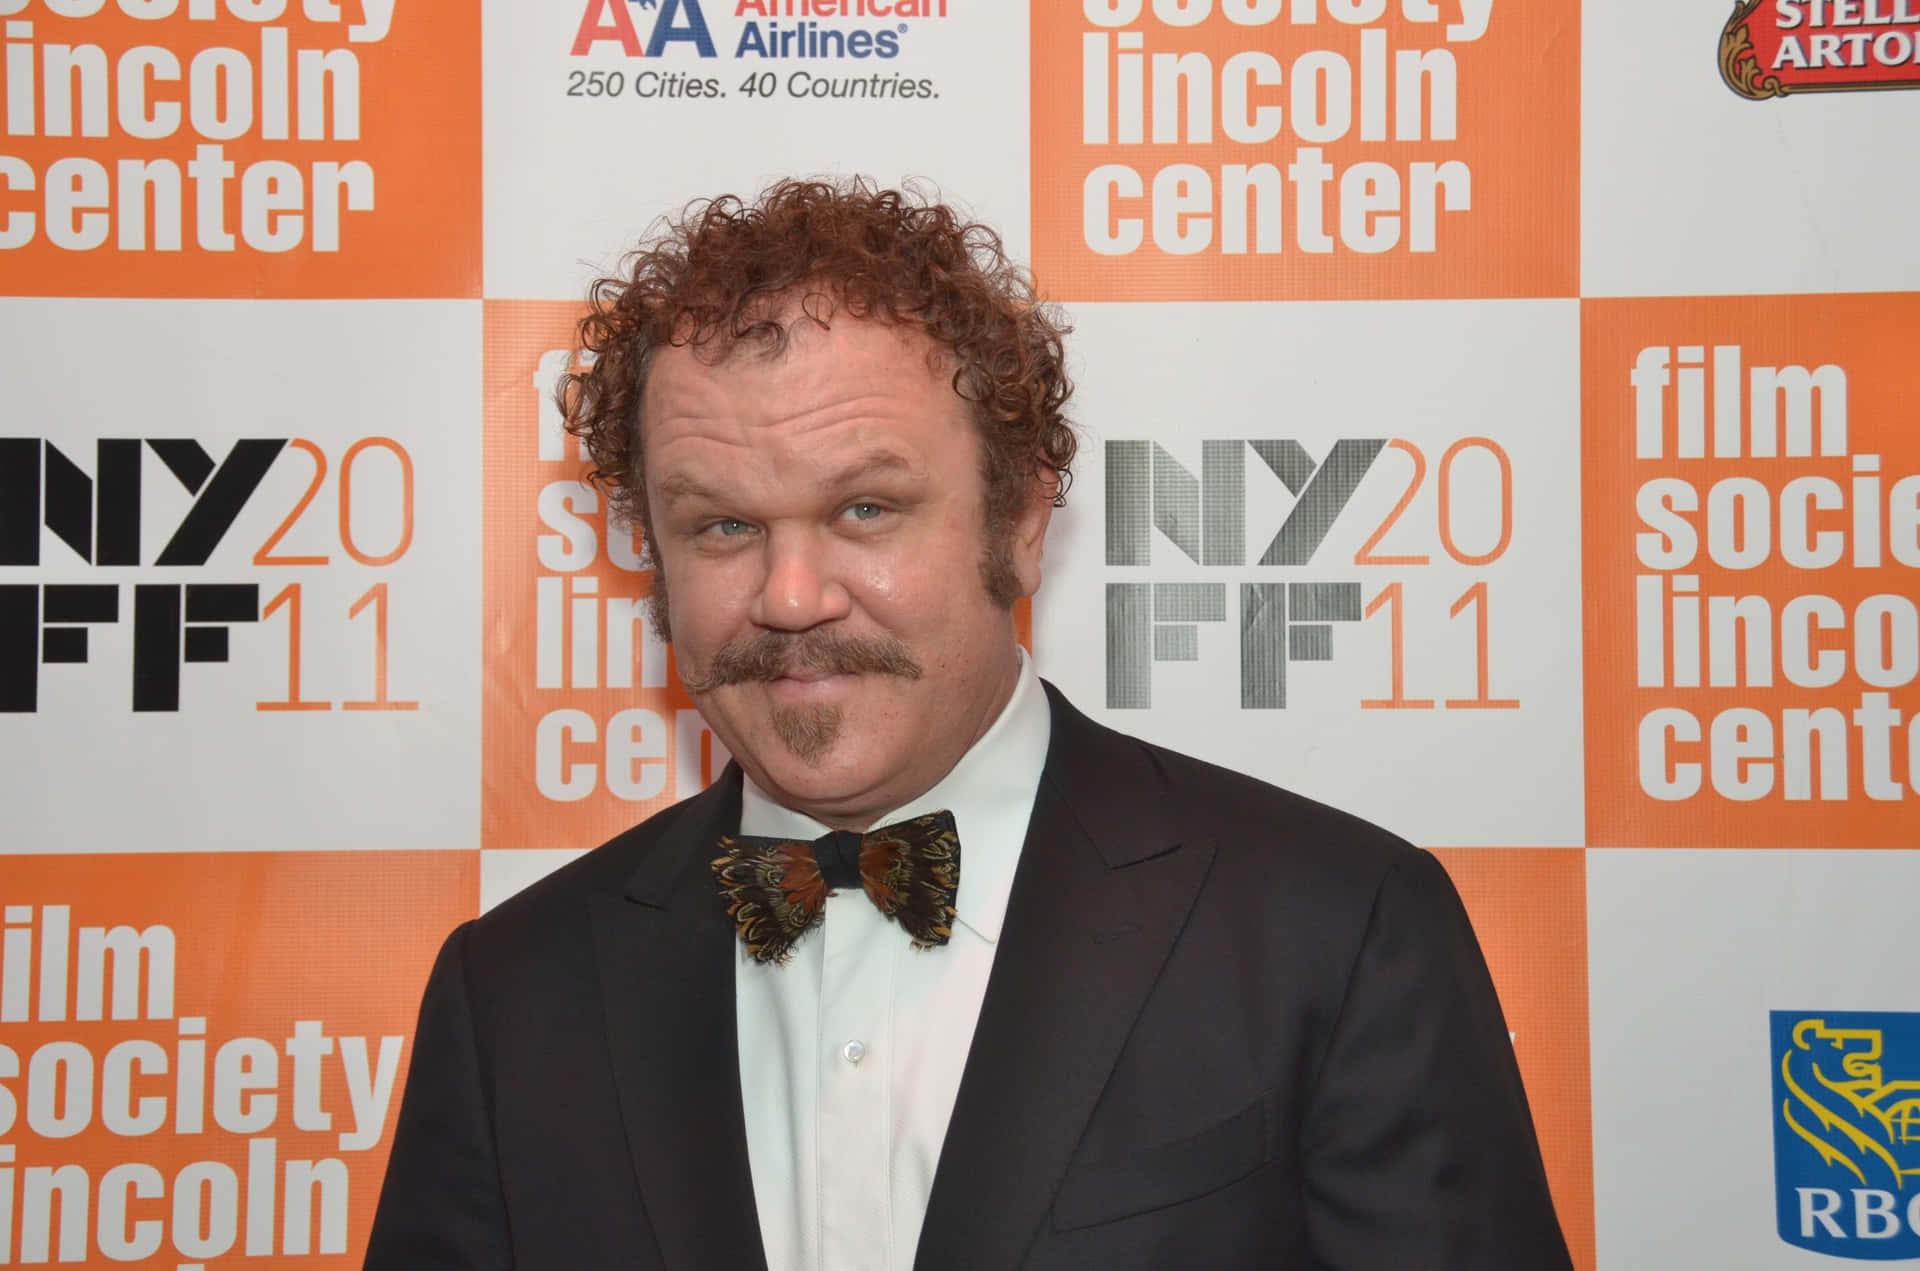 John C. Reilly striking a perfect pose at an event Wallpaper